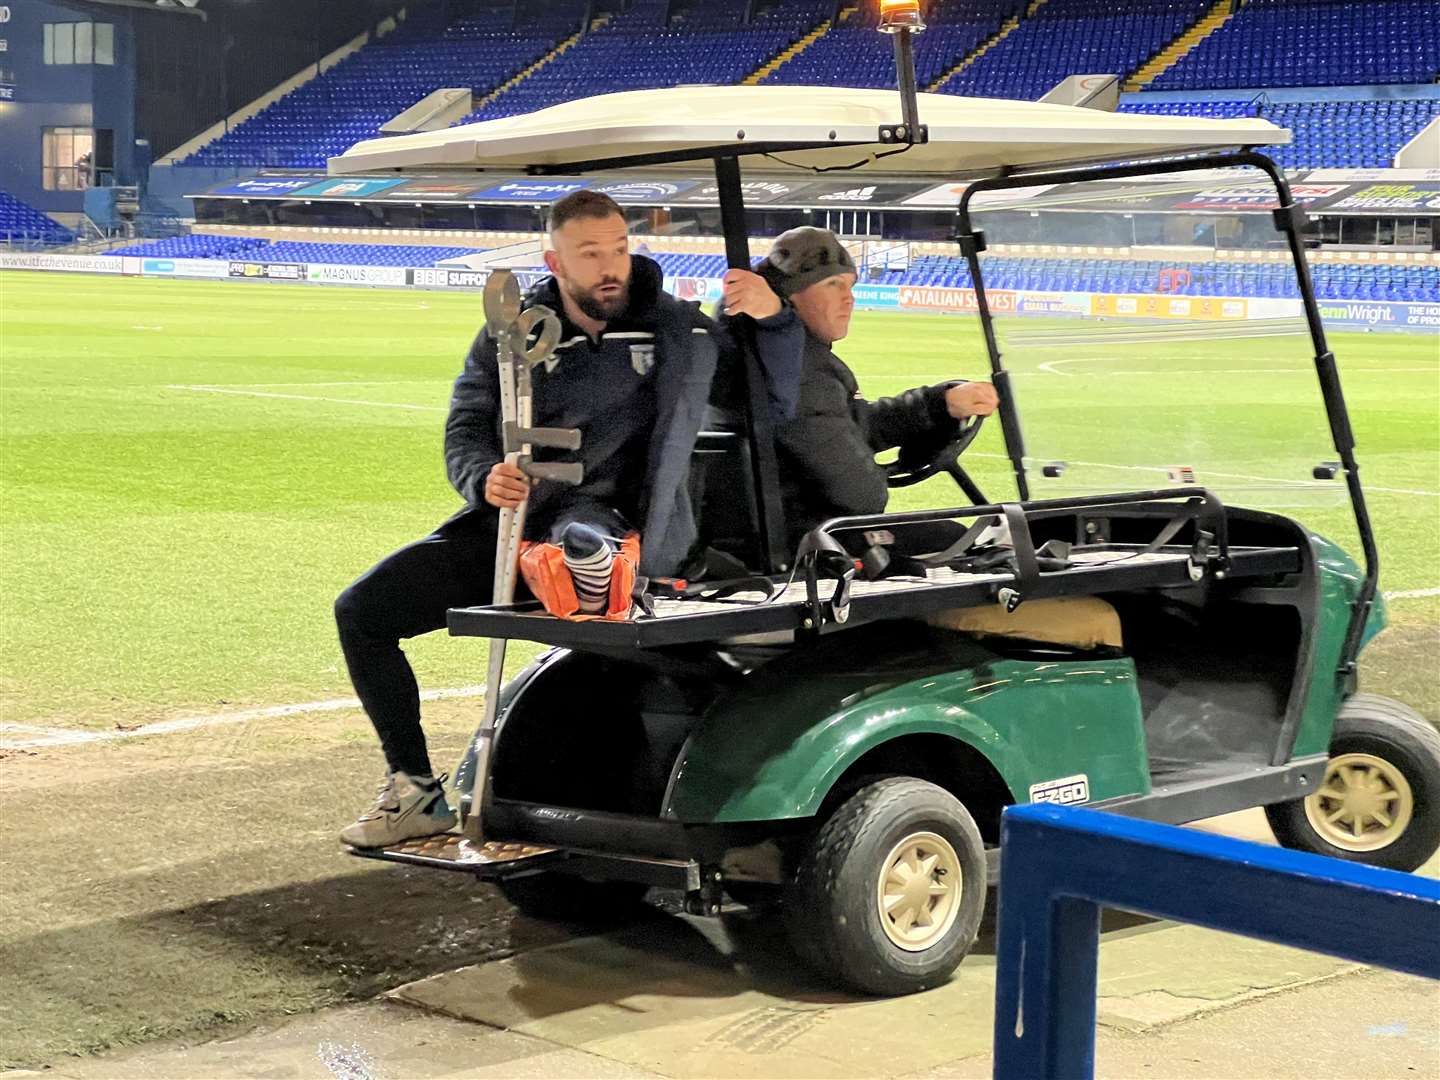 Danny Lloyd leaves Ipswich town FC after the game had finished with a fracture cushion on his left leg Picture: Barry Goodwin